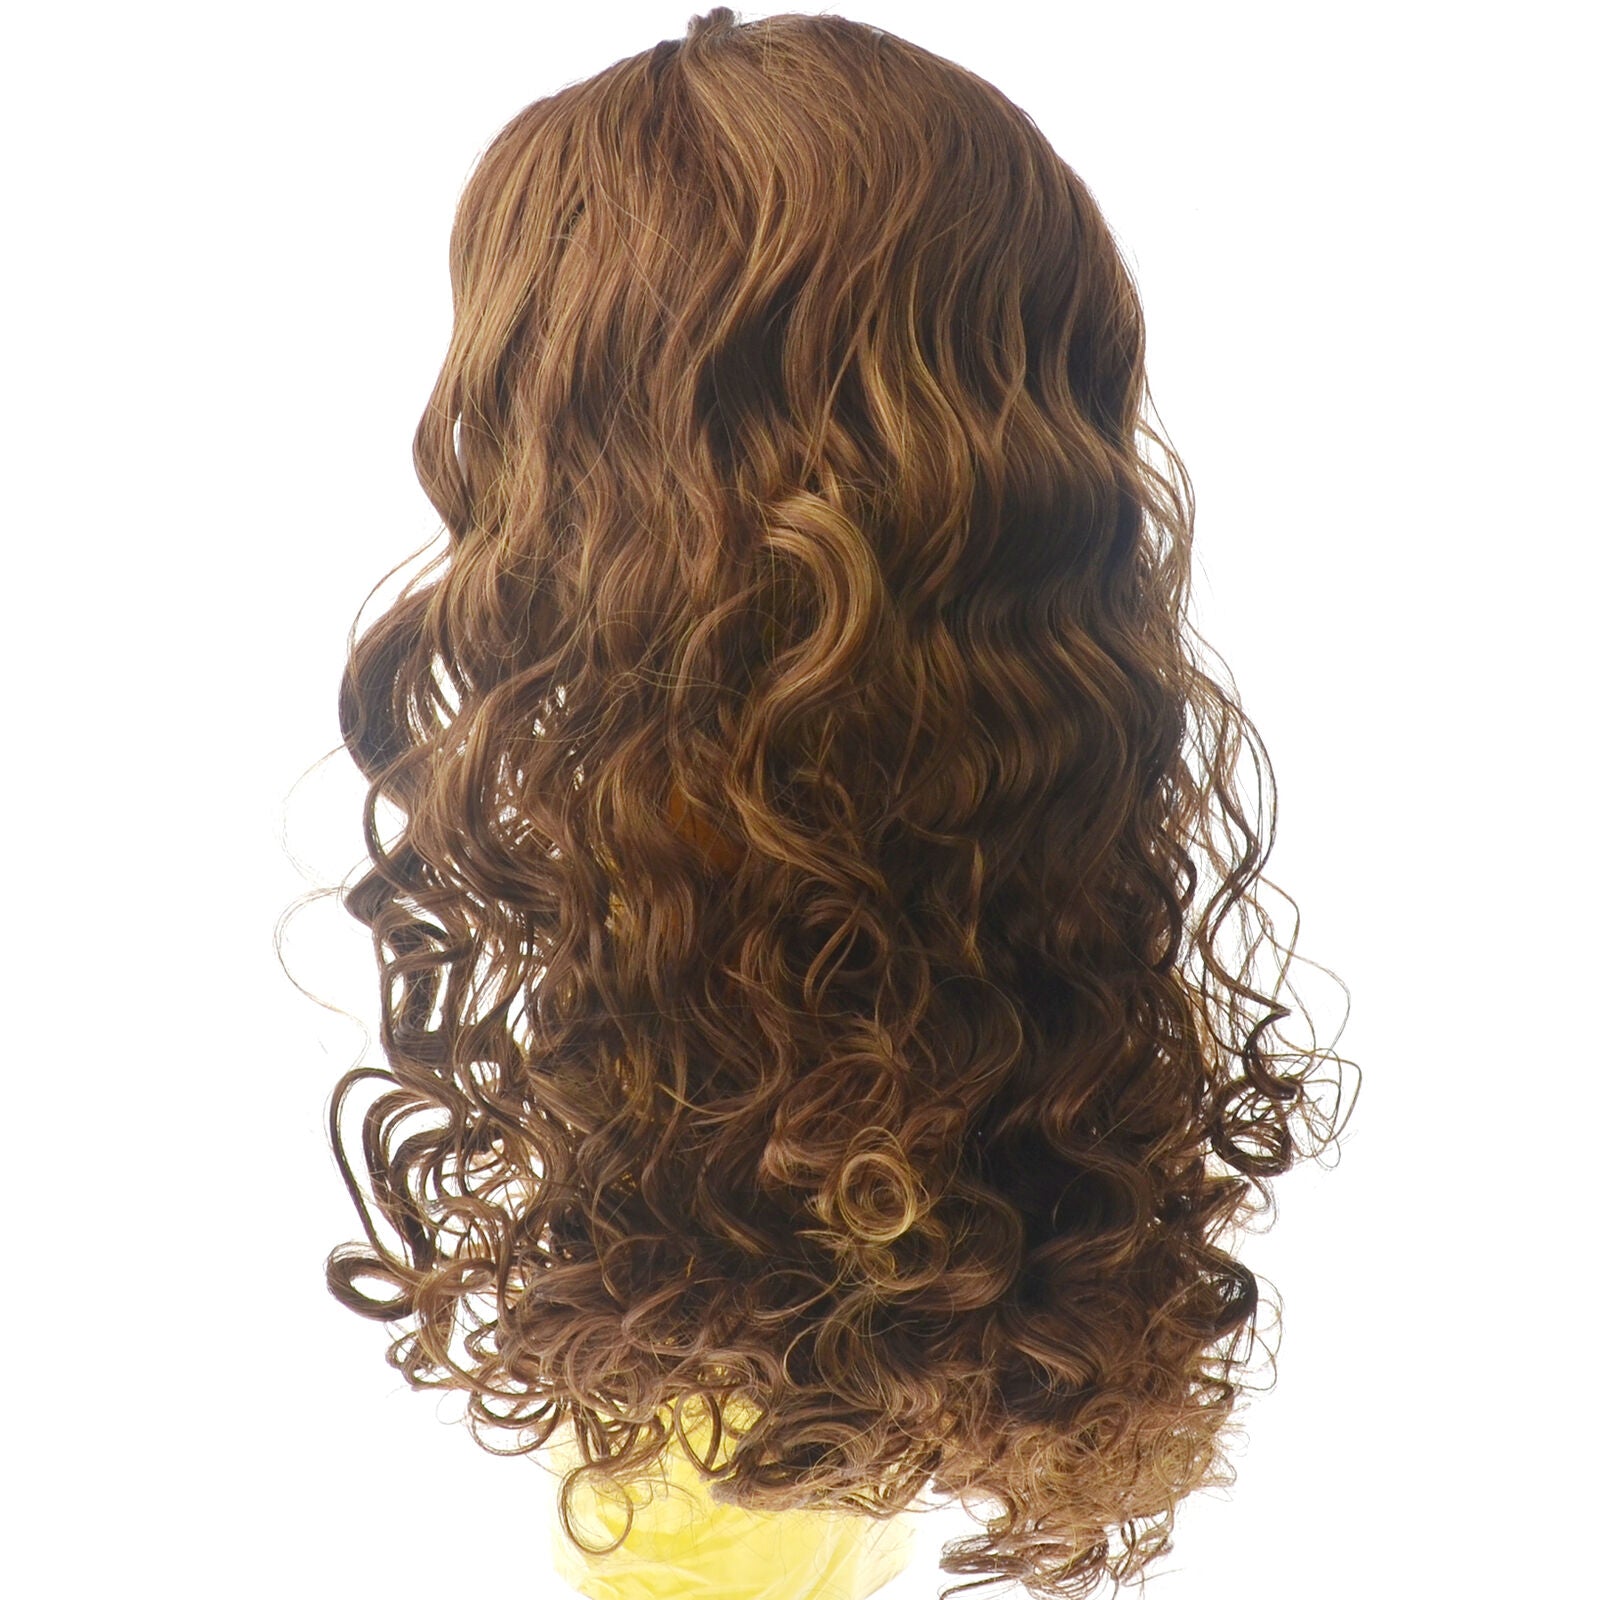 Women's Long Curly Hair Full Wig Heat Resistant Synthetic Hair Brown Wigs Ombre